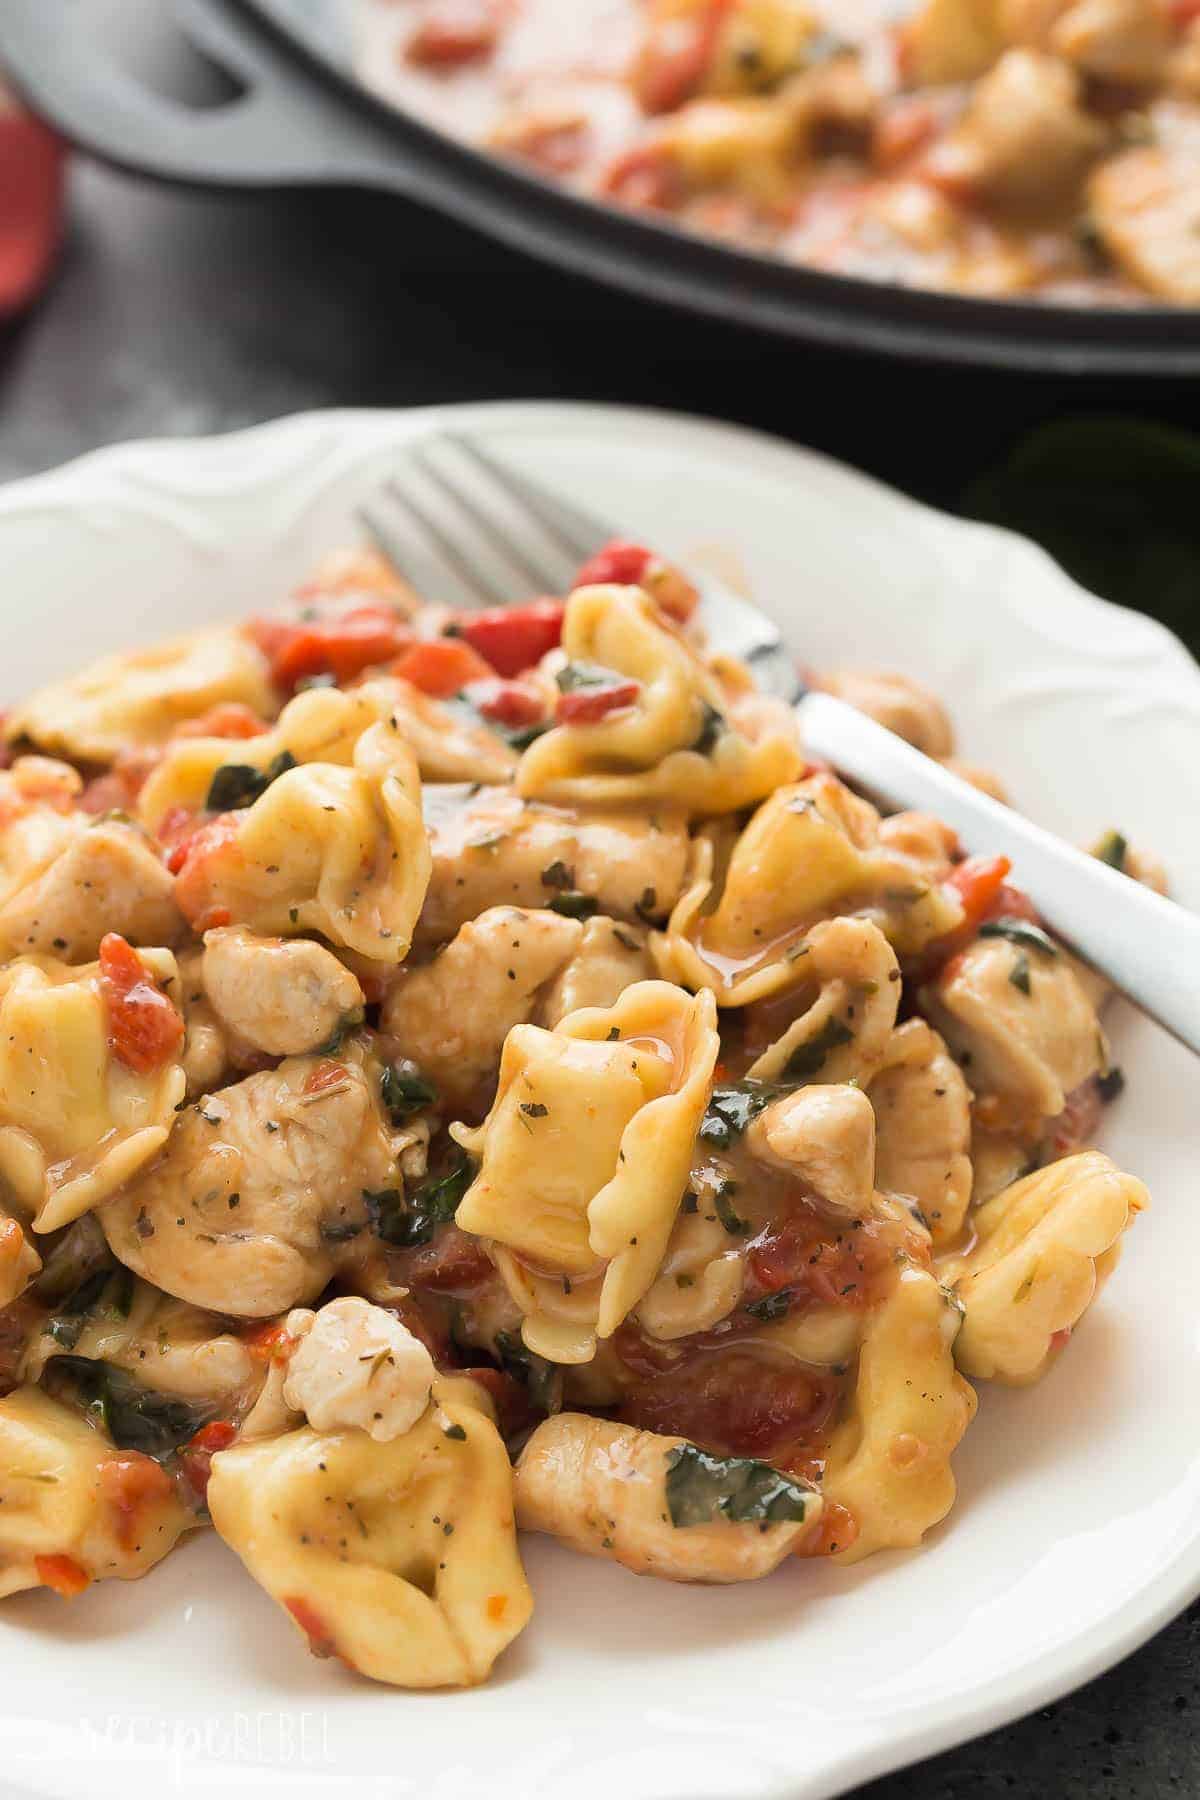 This Italian Chicken Tortellini Skillet is an en easy meal made completely in one pot -- loaded with roasted red peppers, spinach, tomatoes, herbs and cheese!